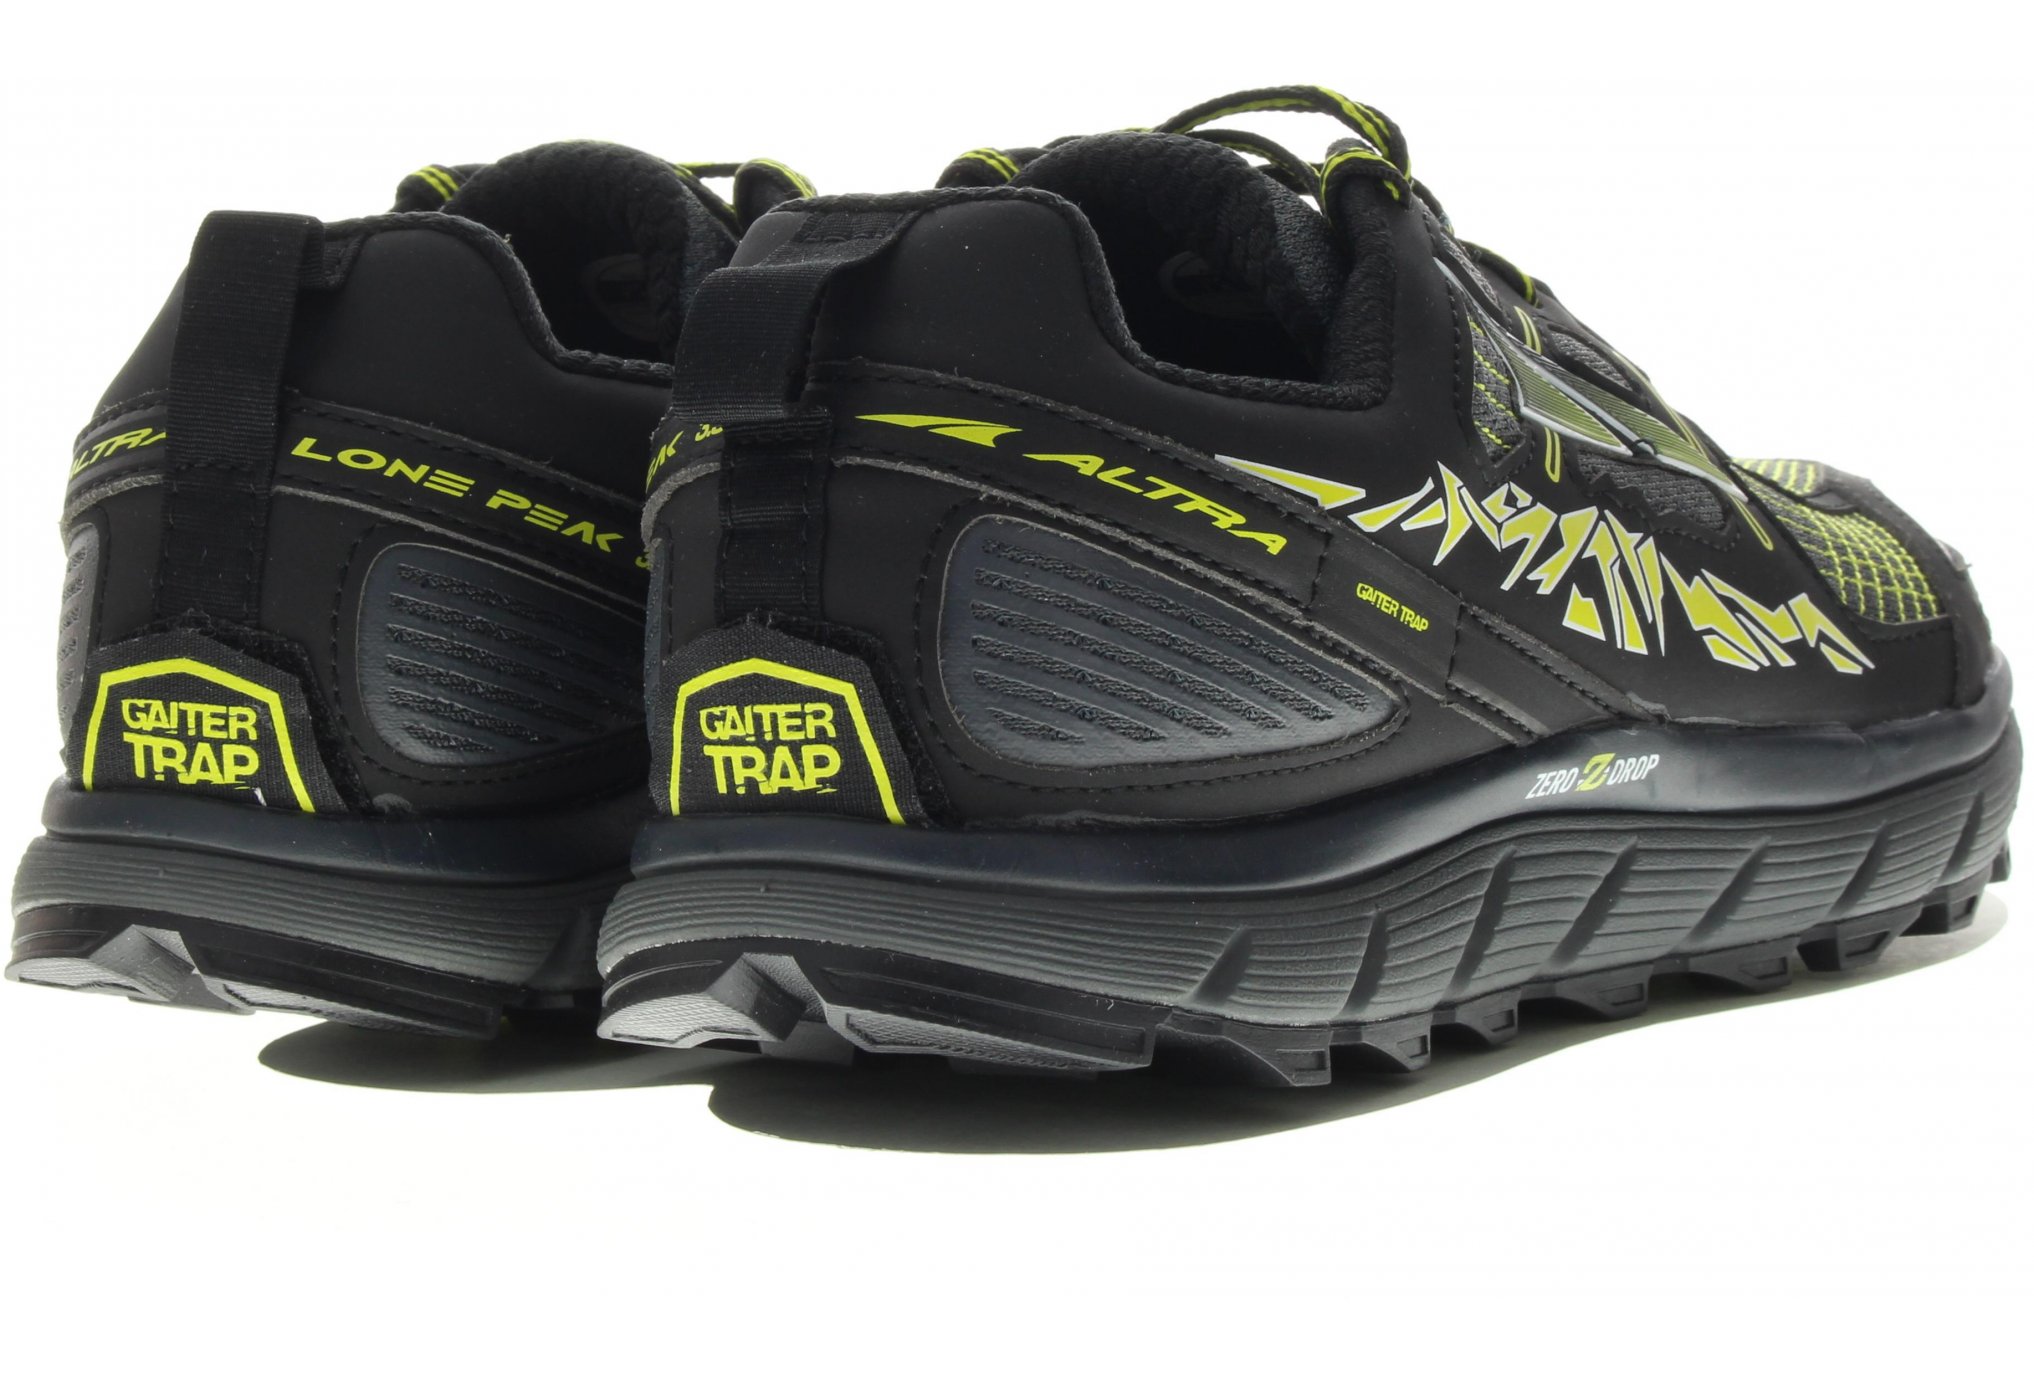 ALTRA CHAUSSURE RUNNING COURSE INTUITION 2 TAILLE 41 NEUF 